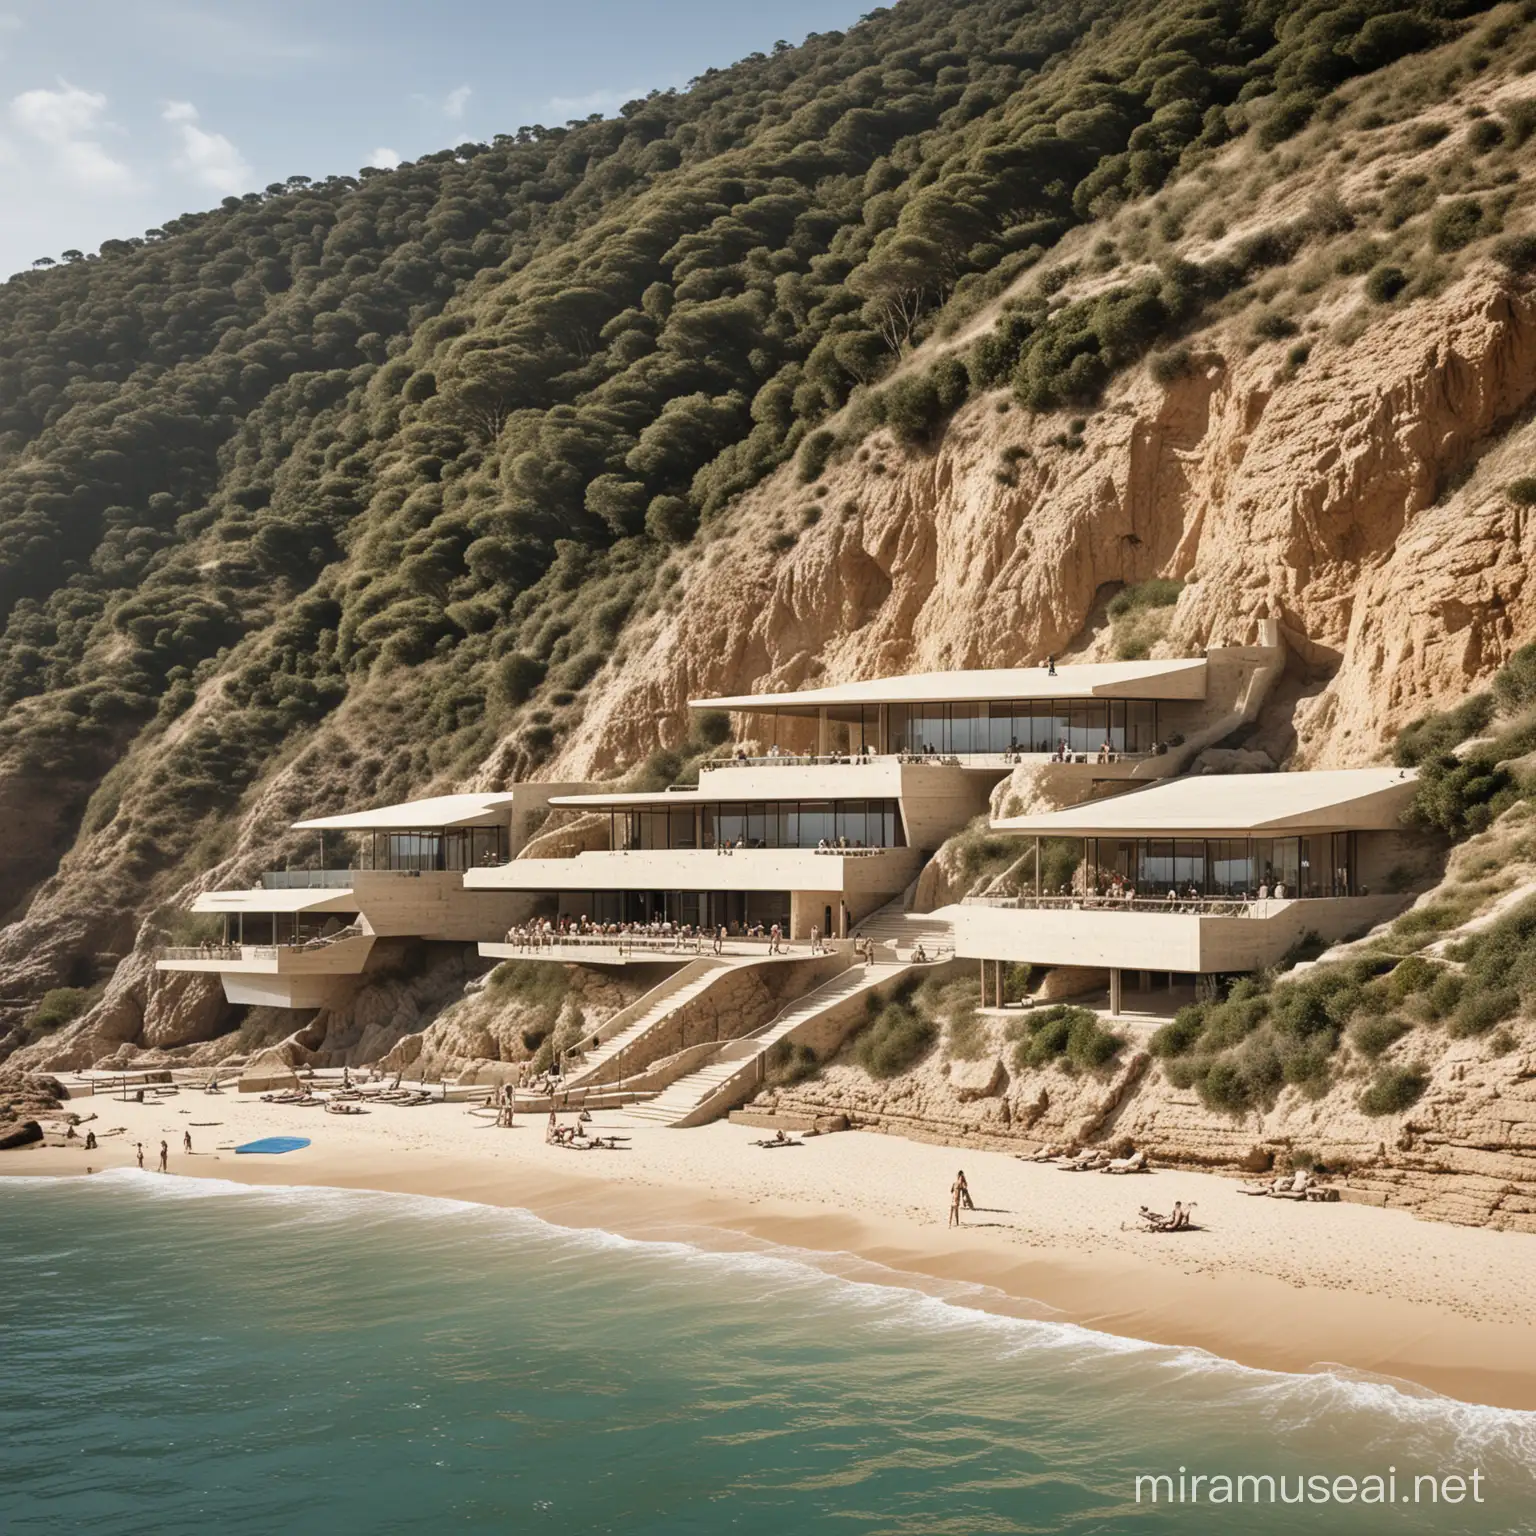 Beachfront Pavilions with Amphitheatre Seating on a Hill